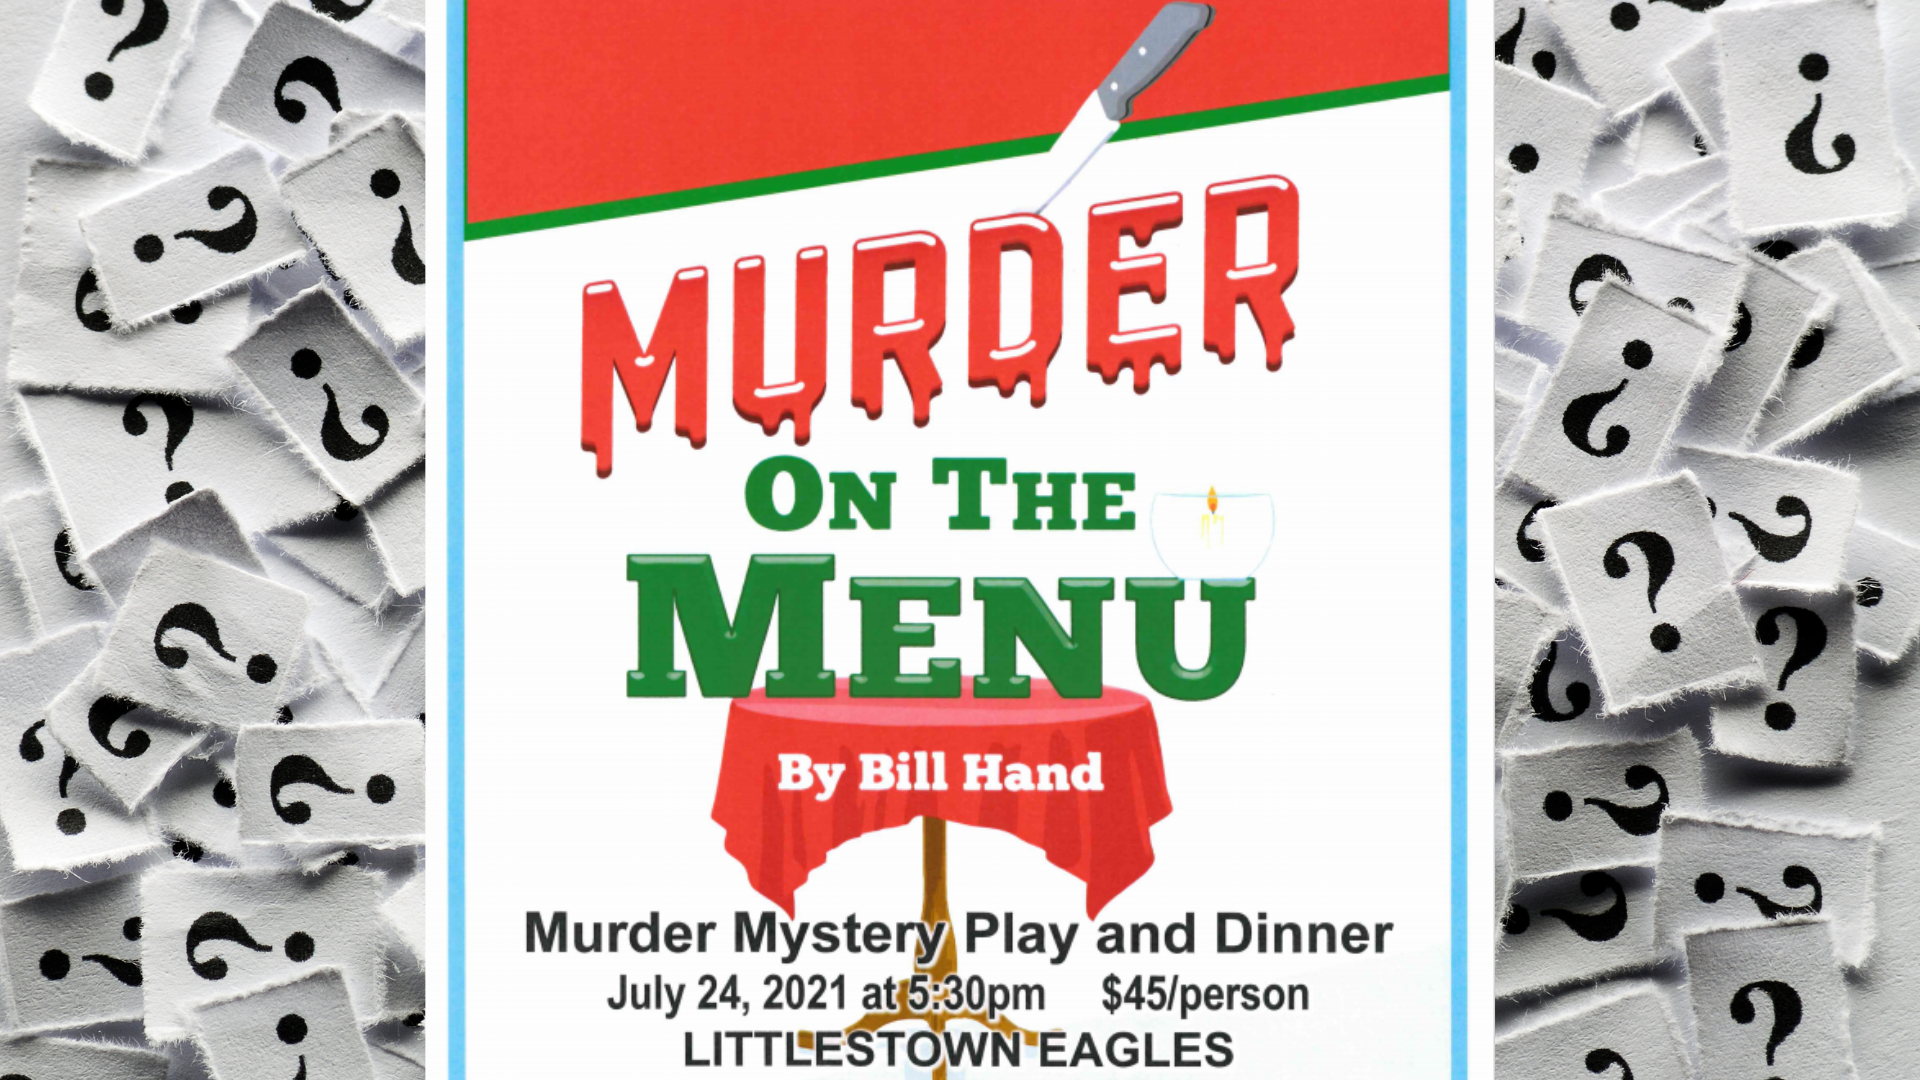 "Murder on the Menu" Murder Mystery Play and Dinner sponsered by the Friends of the Littlestown Library on Saturday, July 24, 2021 at 5:30pm